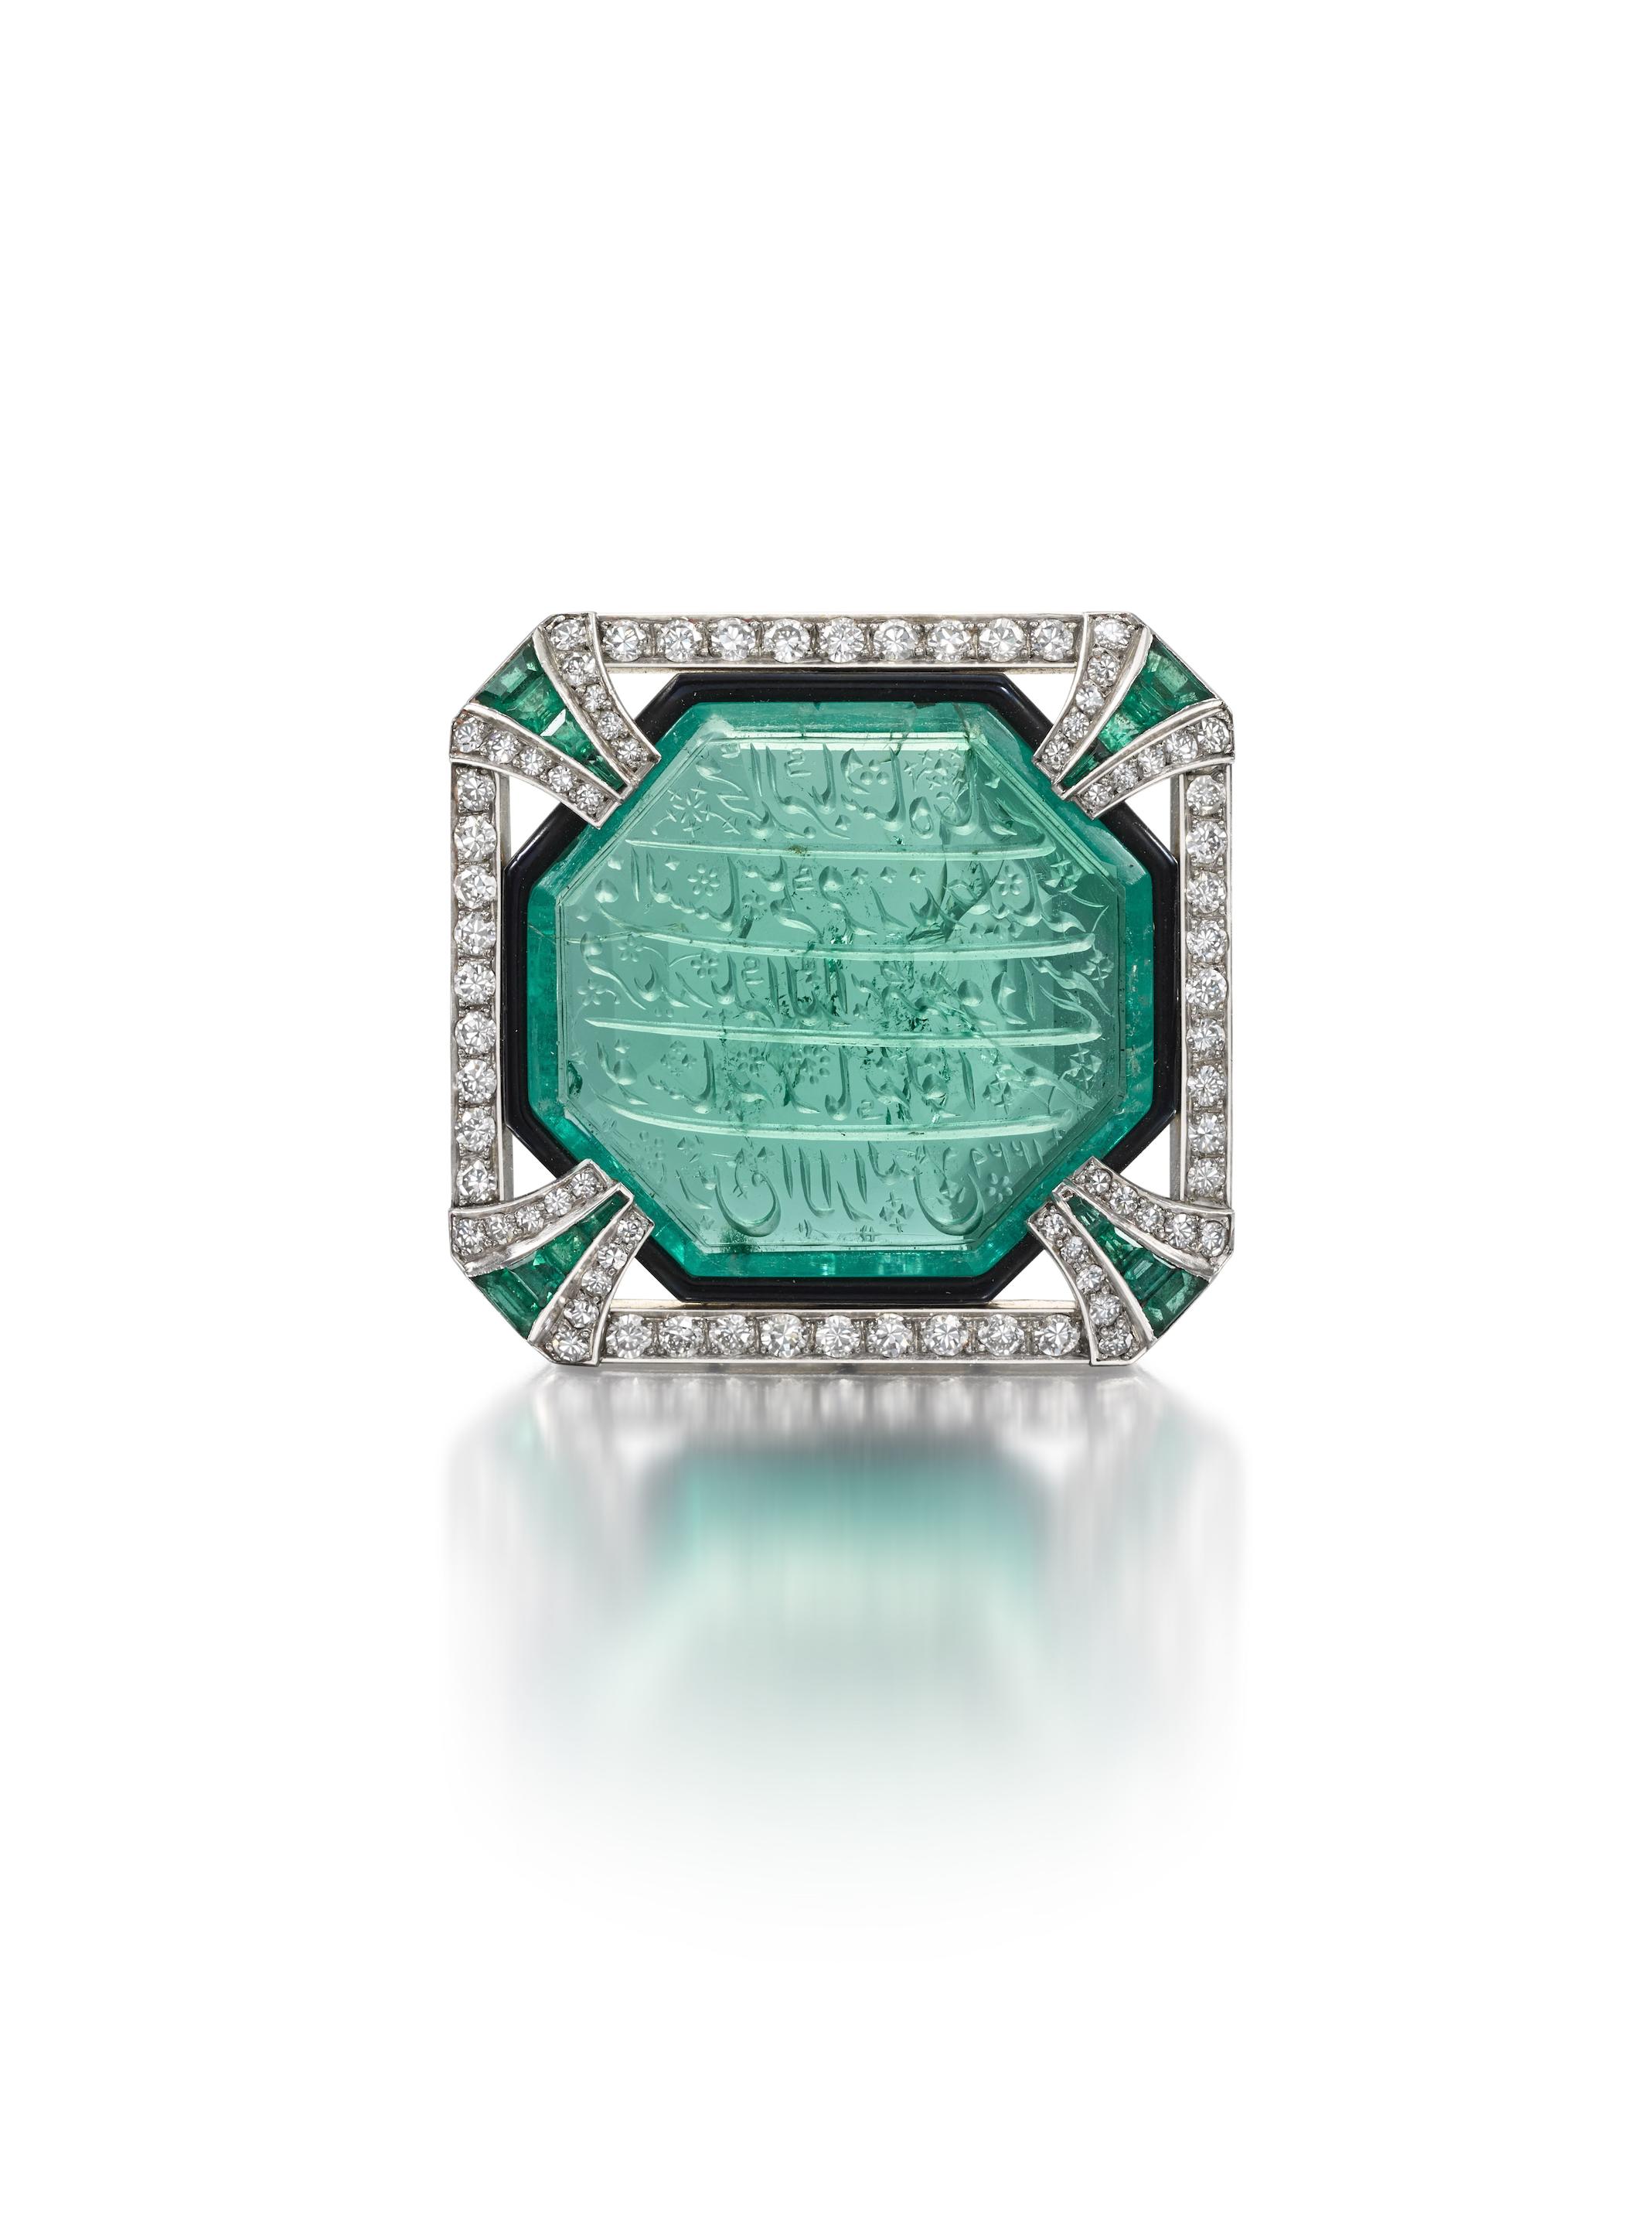 An Art Deco emerald, diamond and enamel brooch, by Hennell, circa 1925,